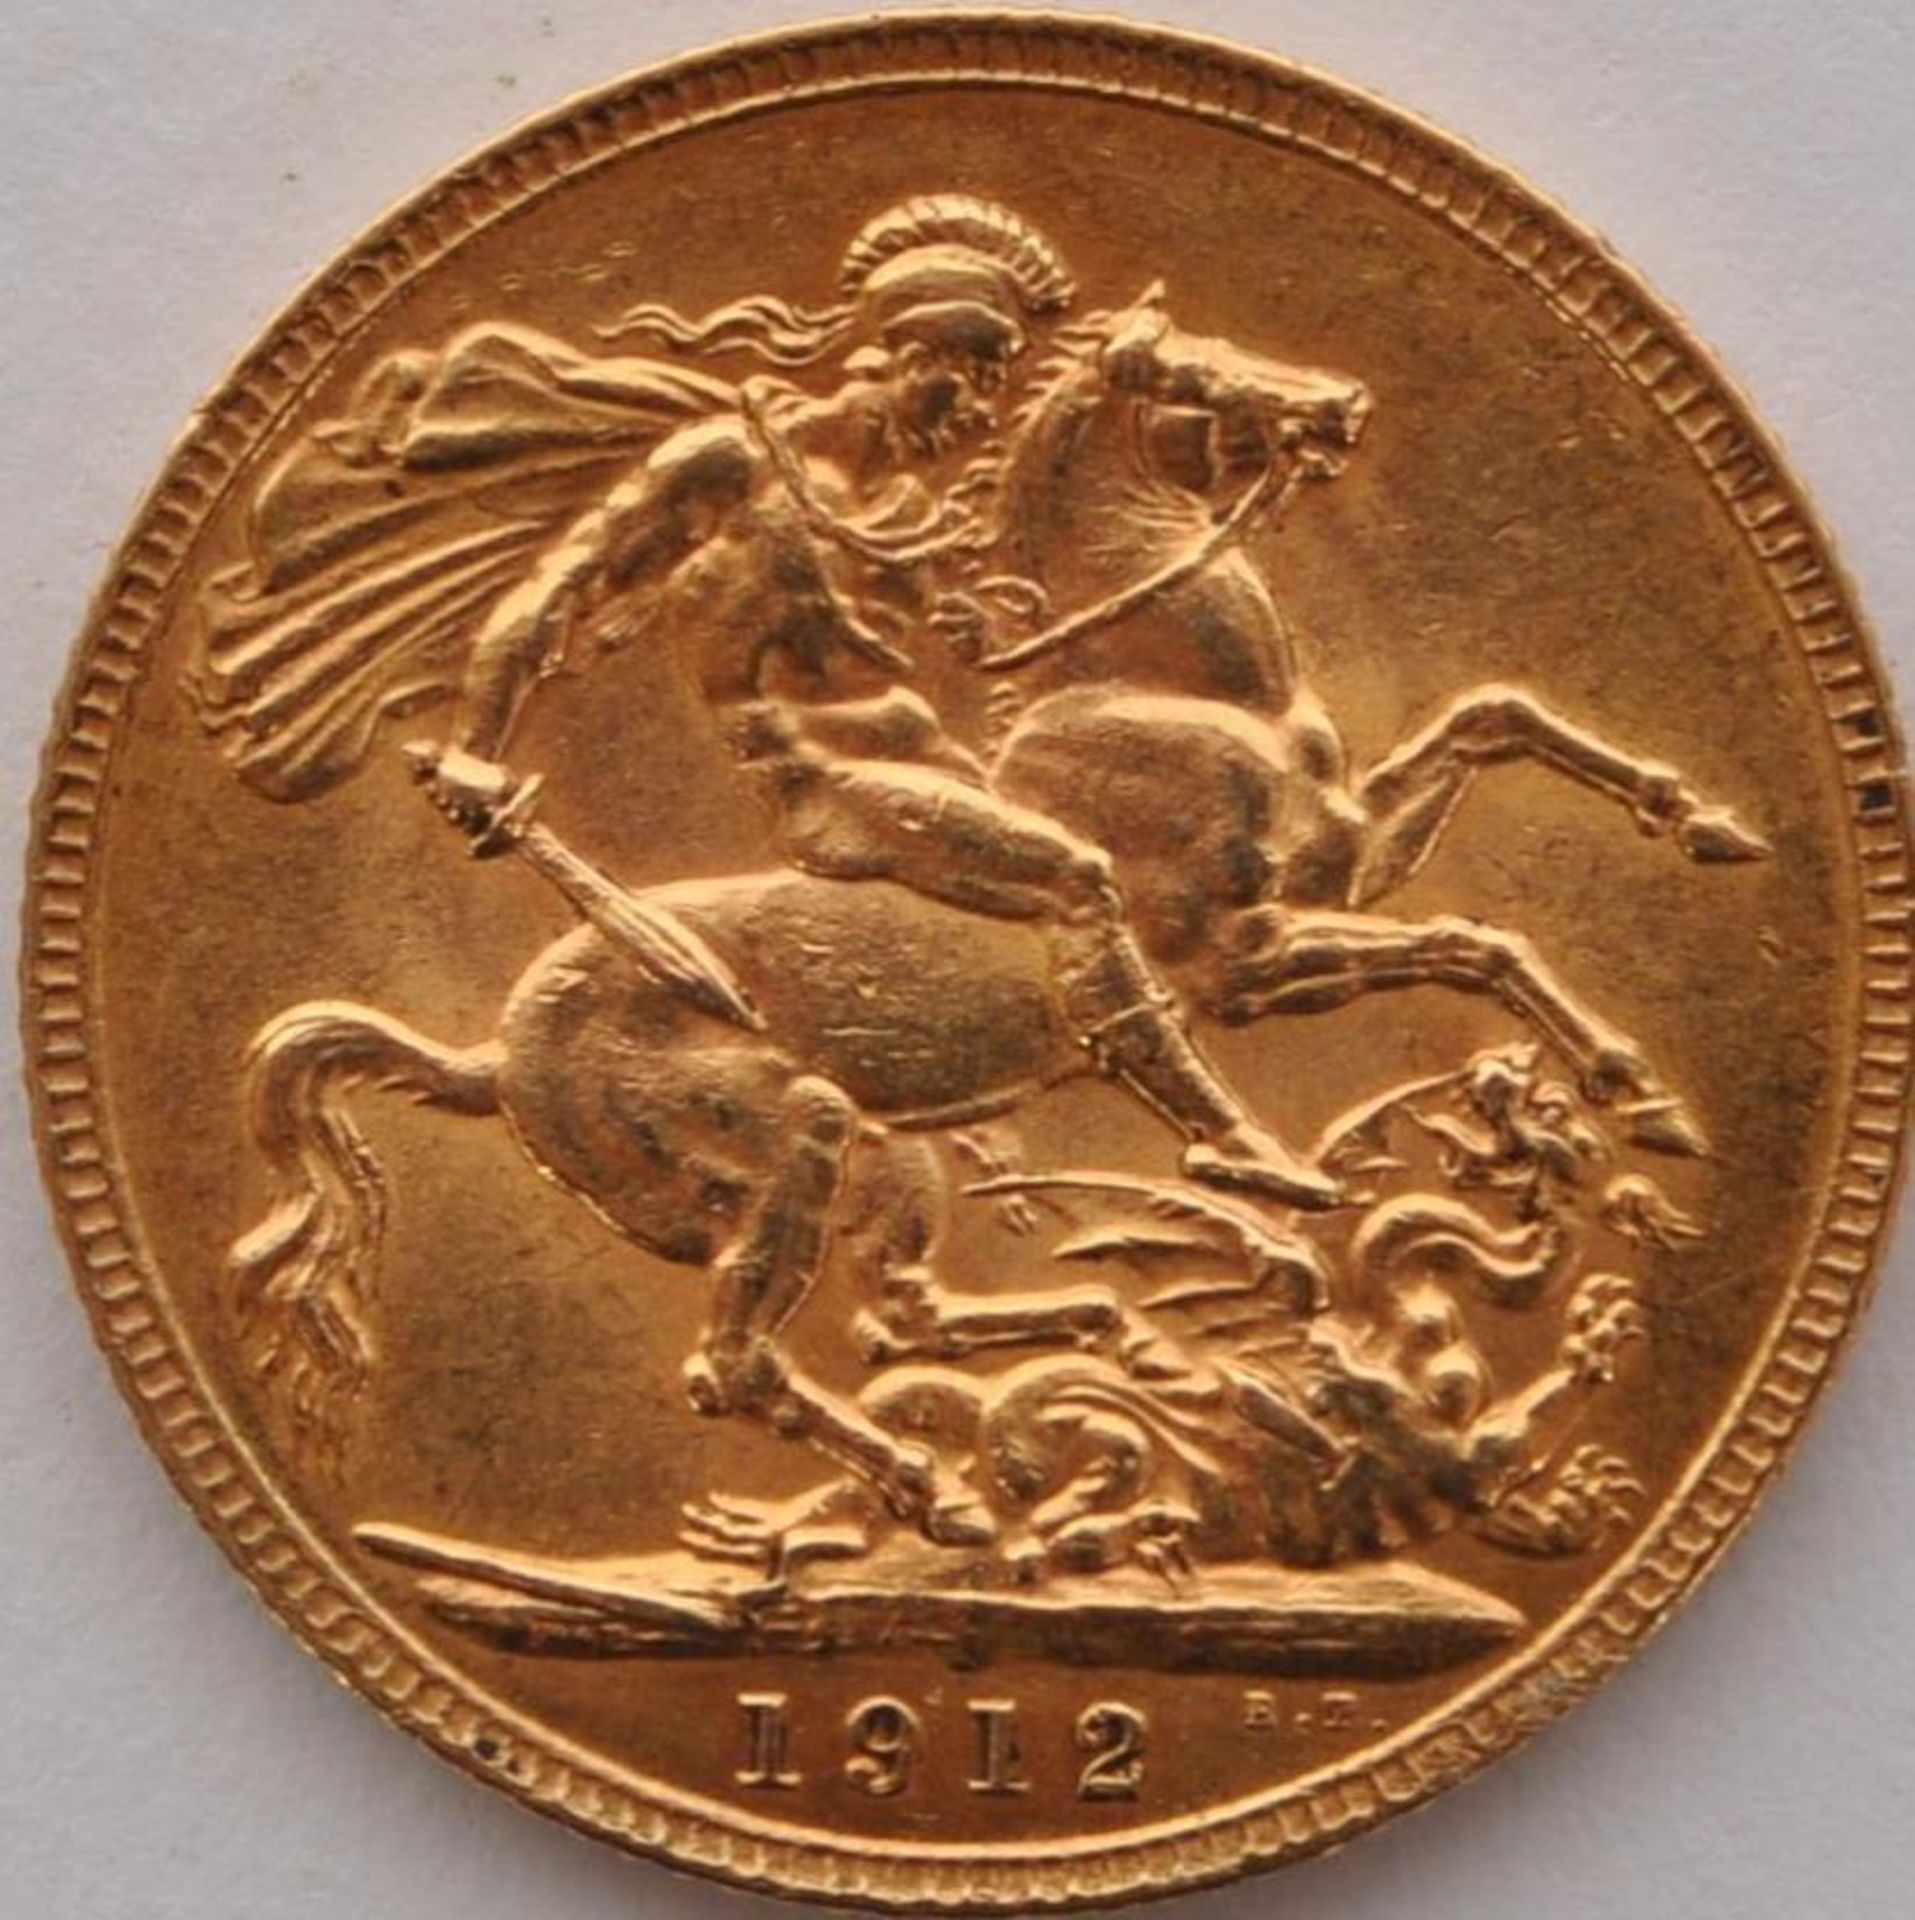 WITHDRAWN 22CT GOLD 1912 GEORGE V FULL SOVEREIGN COIN - Image 2 of 4